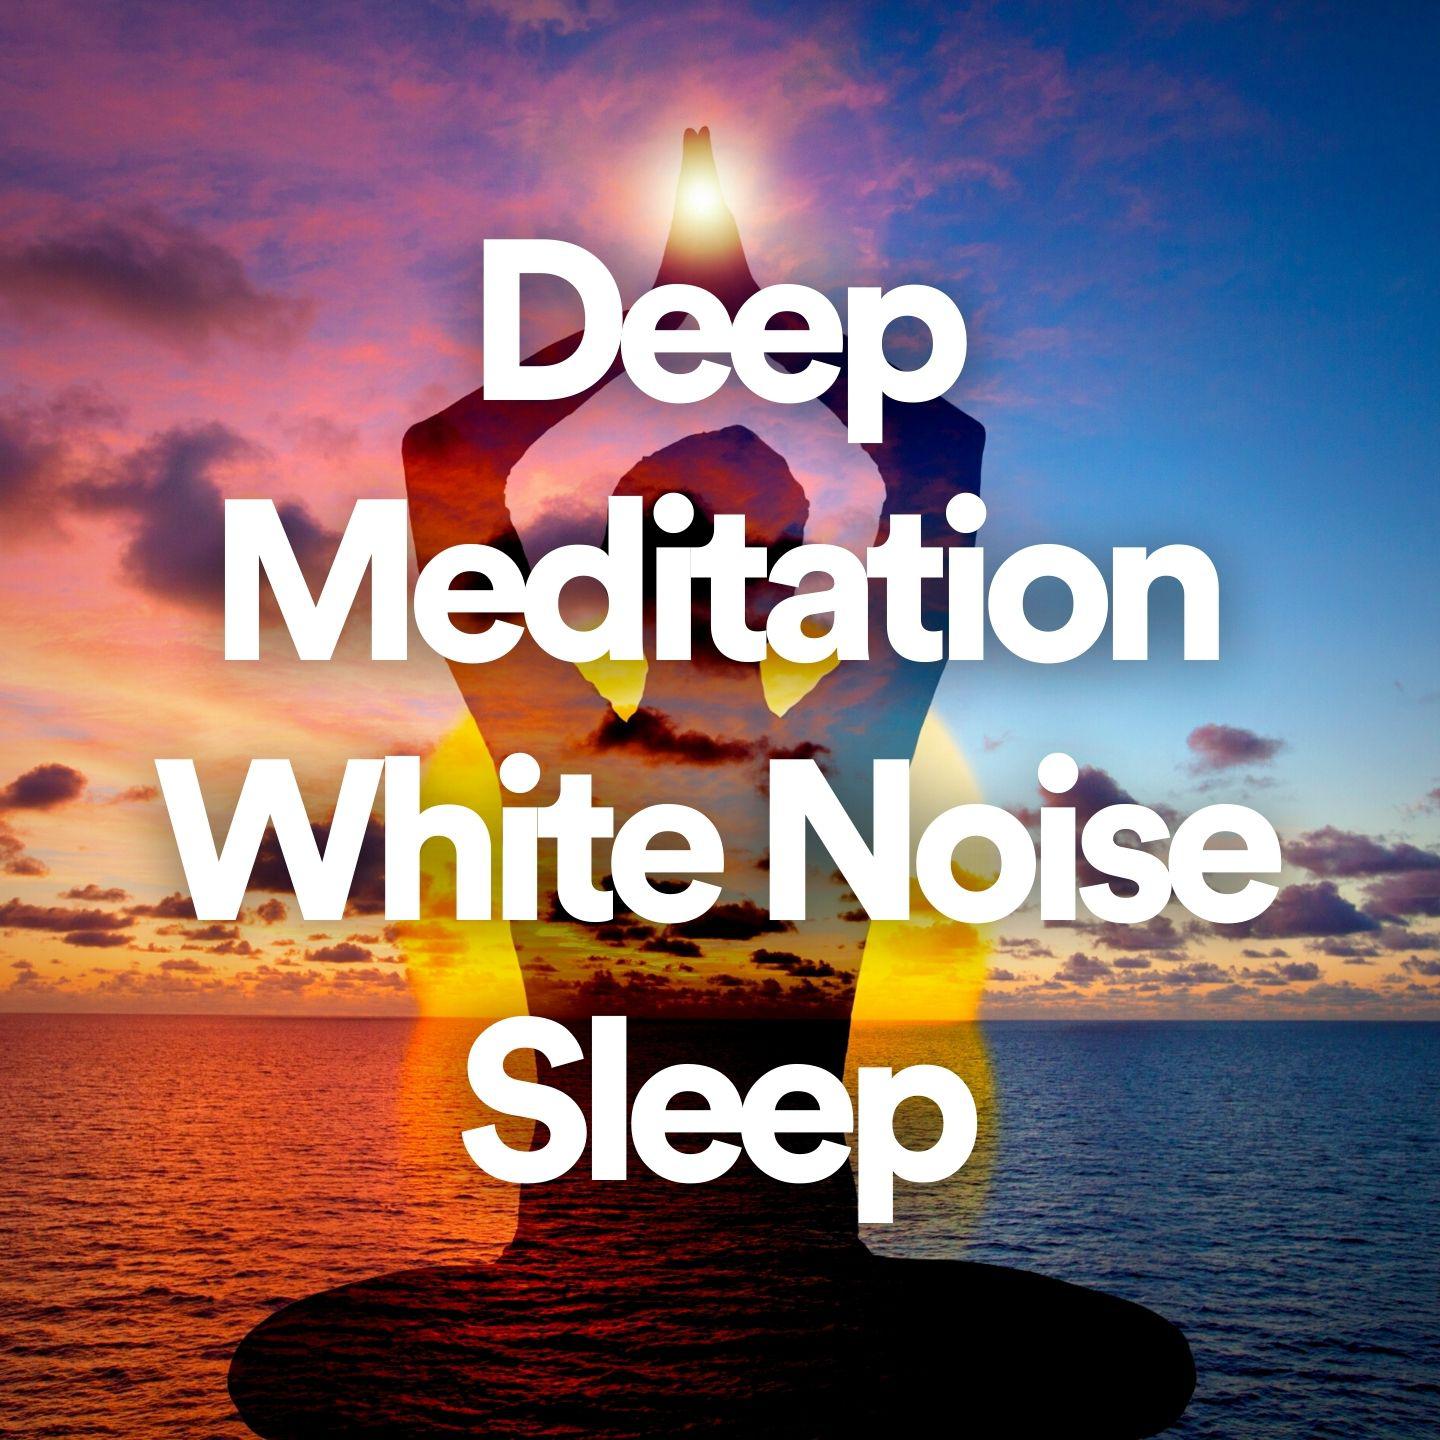 Zen Meditation and Natural White Noise and New Age Deep Massage - Zen Attitude